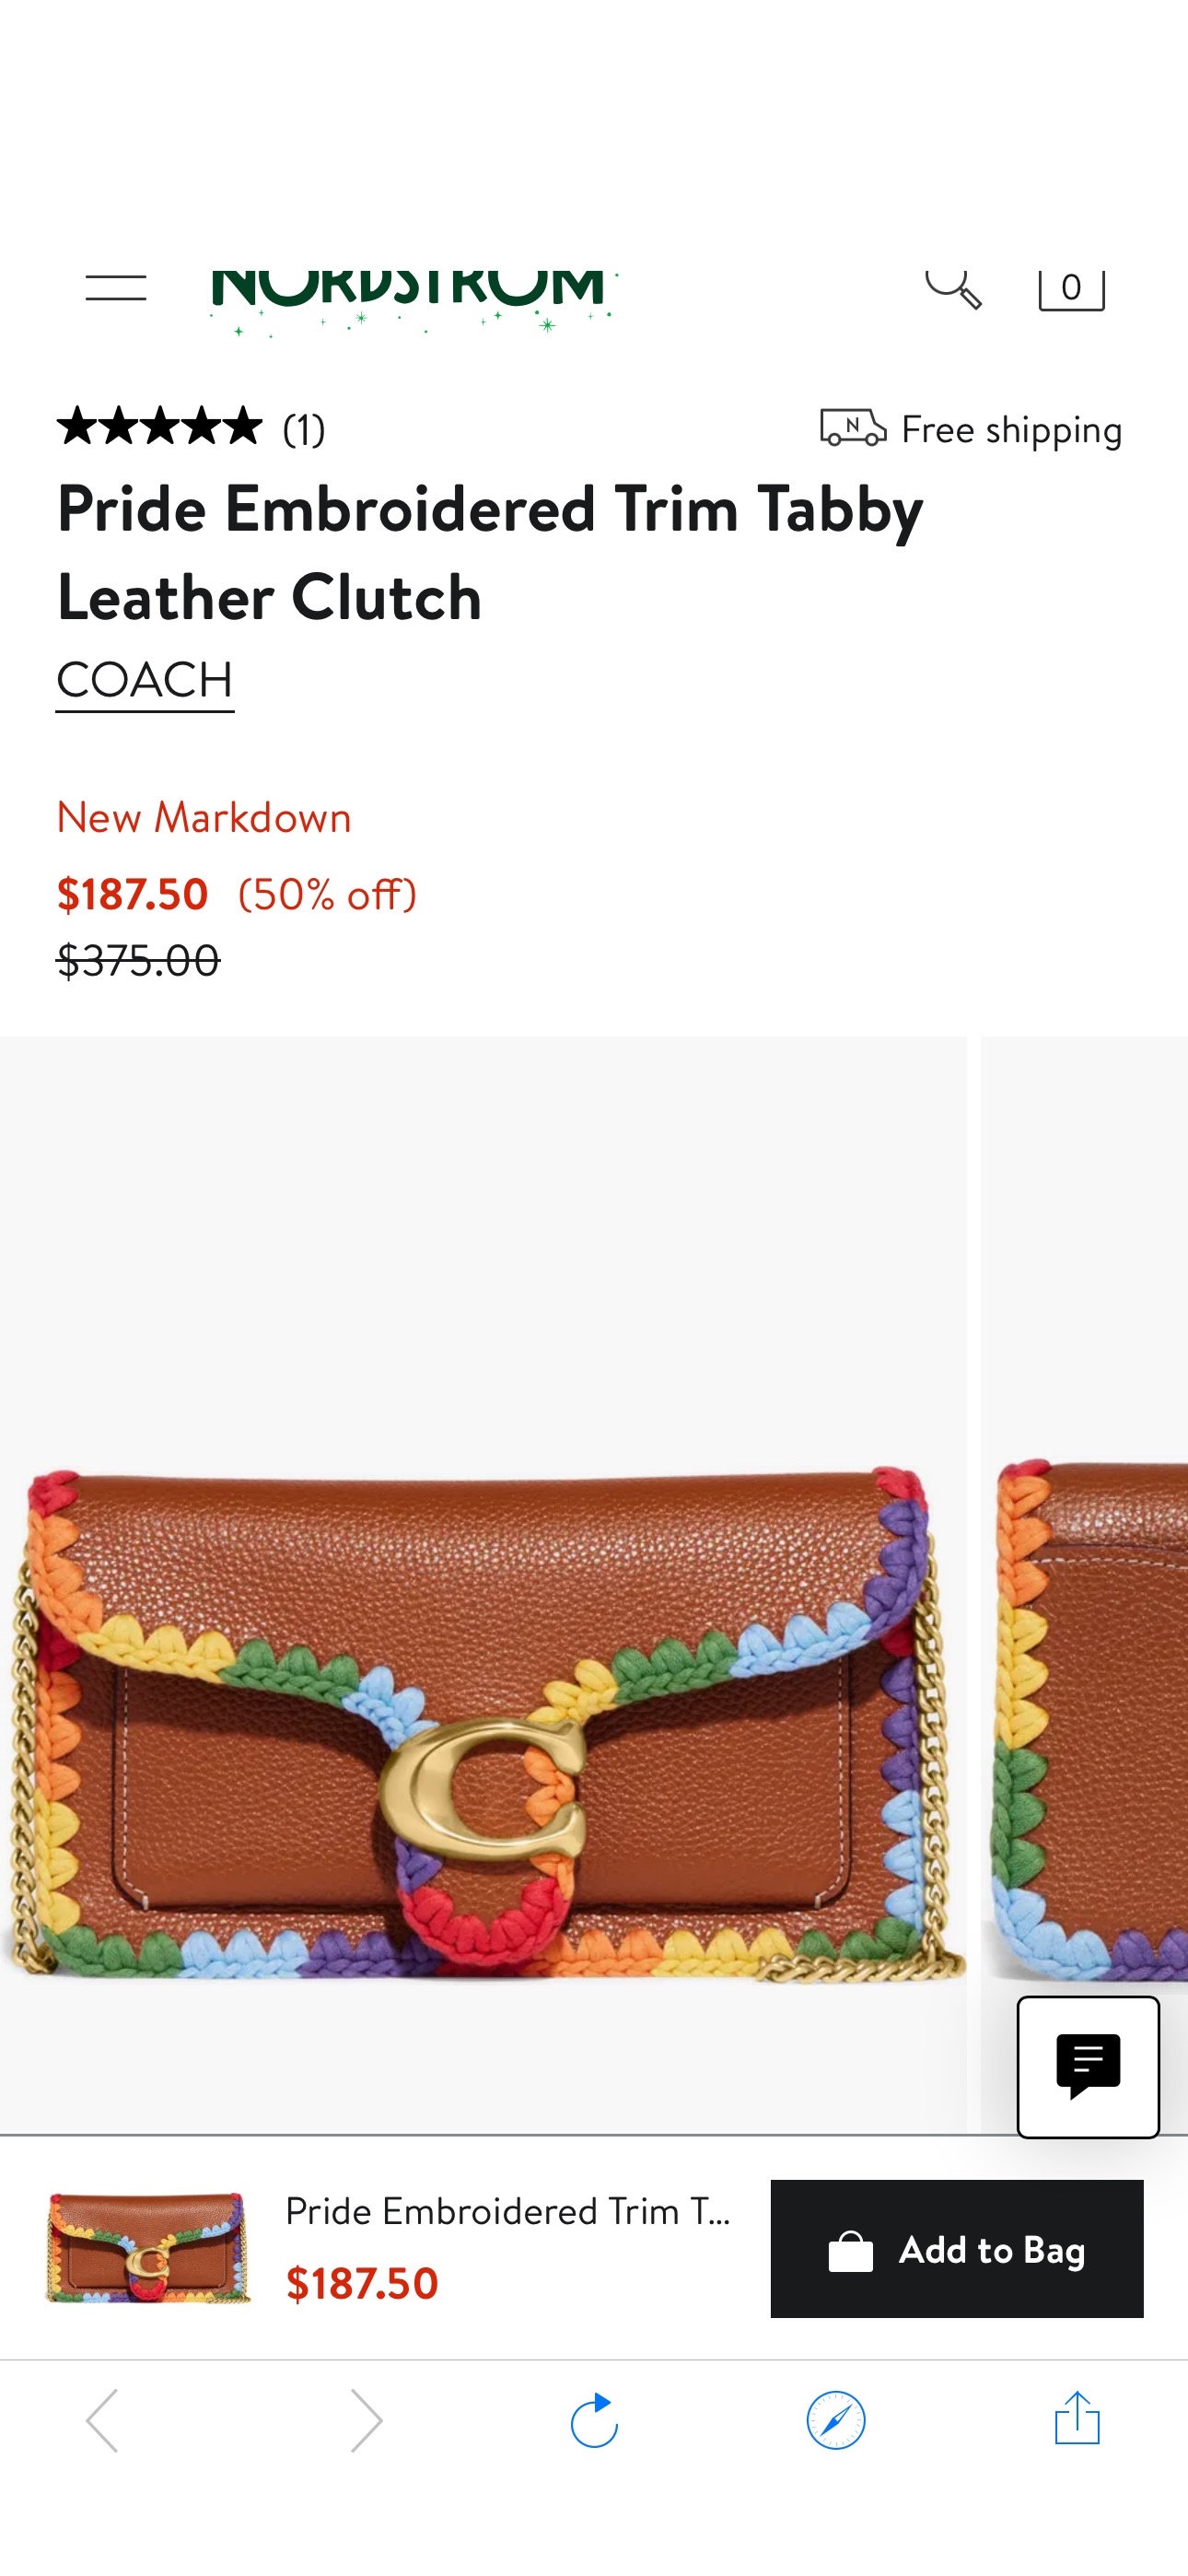 COACH Pride Embroidered Trim Tabby Leather Clutch | Nordstrom